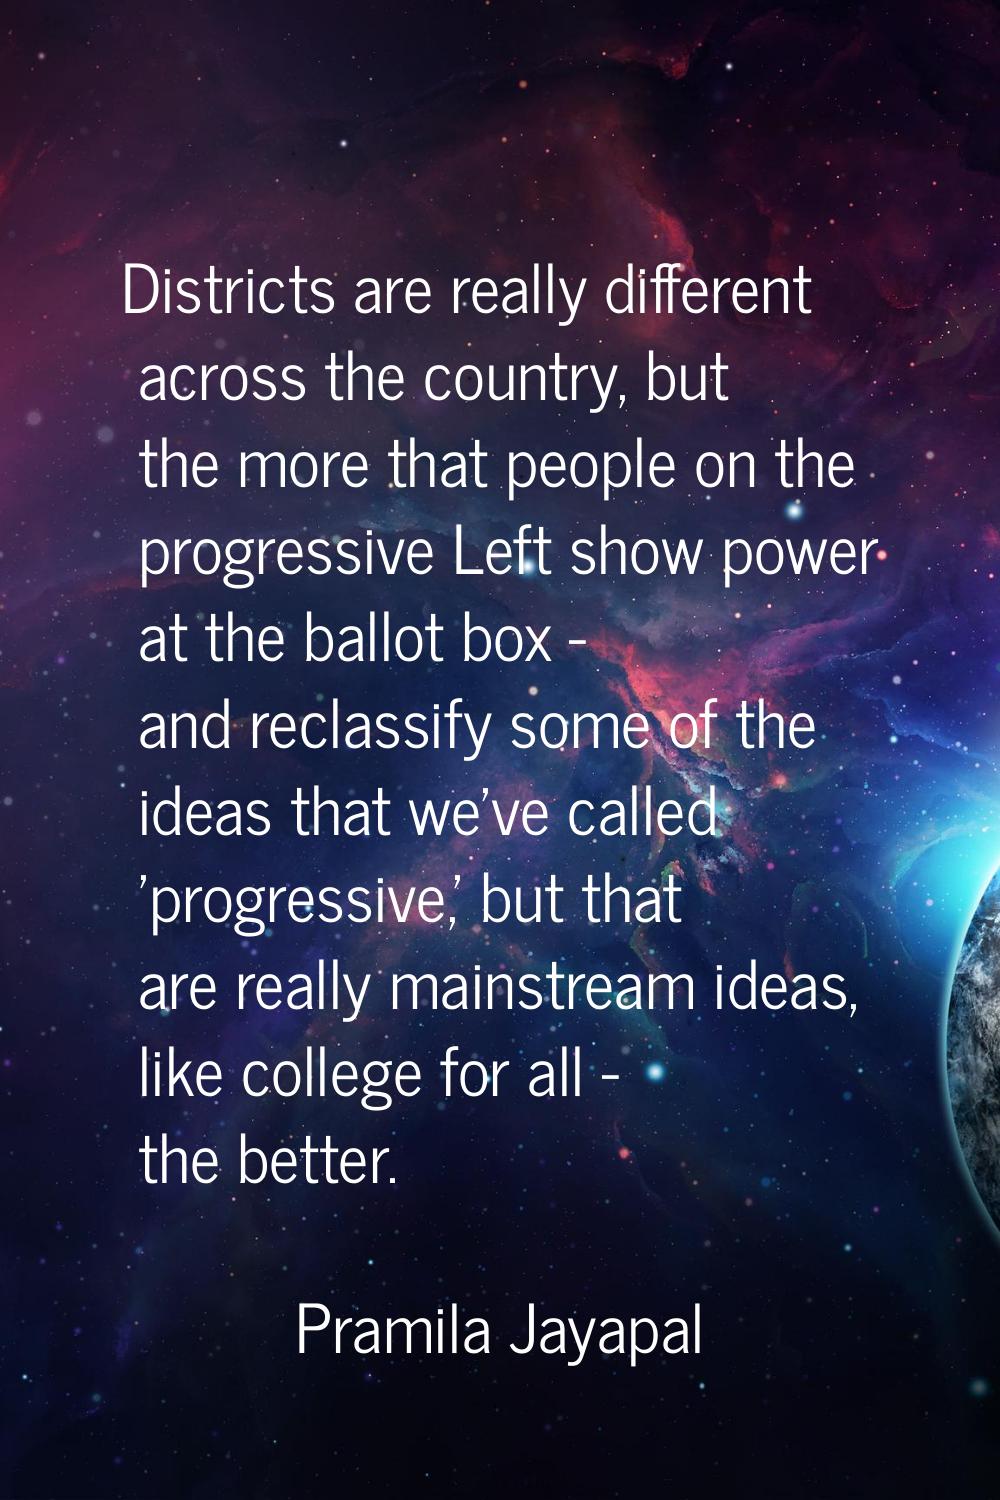 Districts are really different across the country, but the more that people on the progressive Left